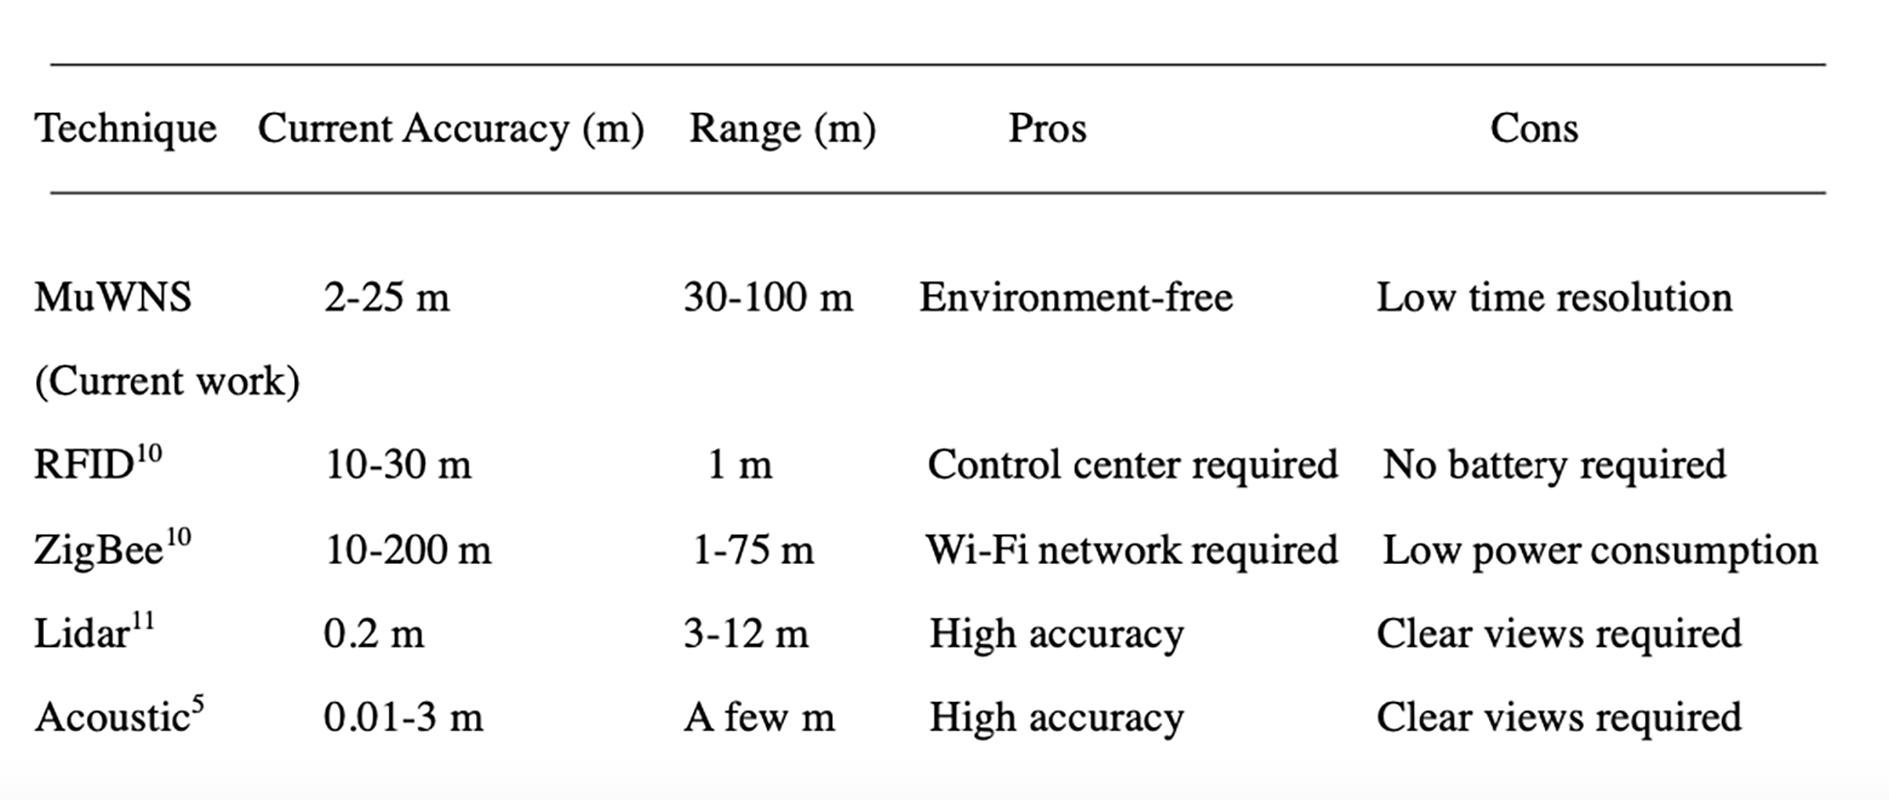 Table comparing the accuracy and range of different navigation systems.